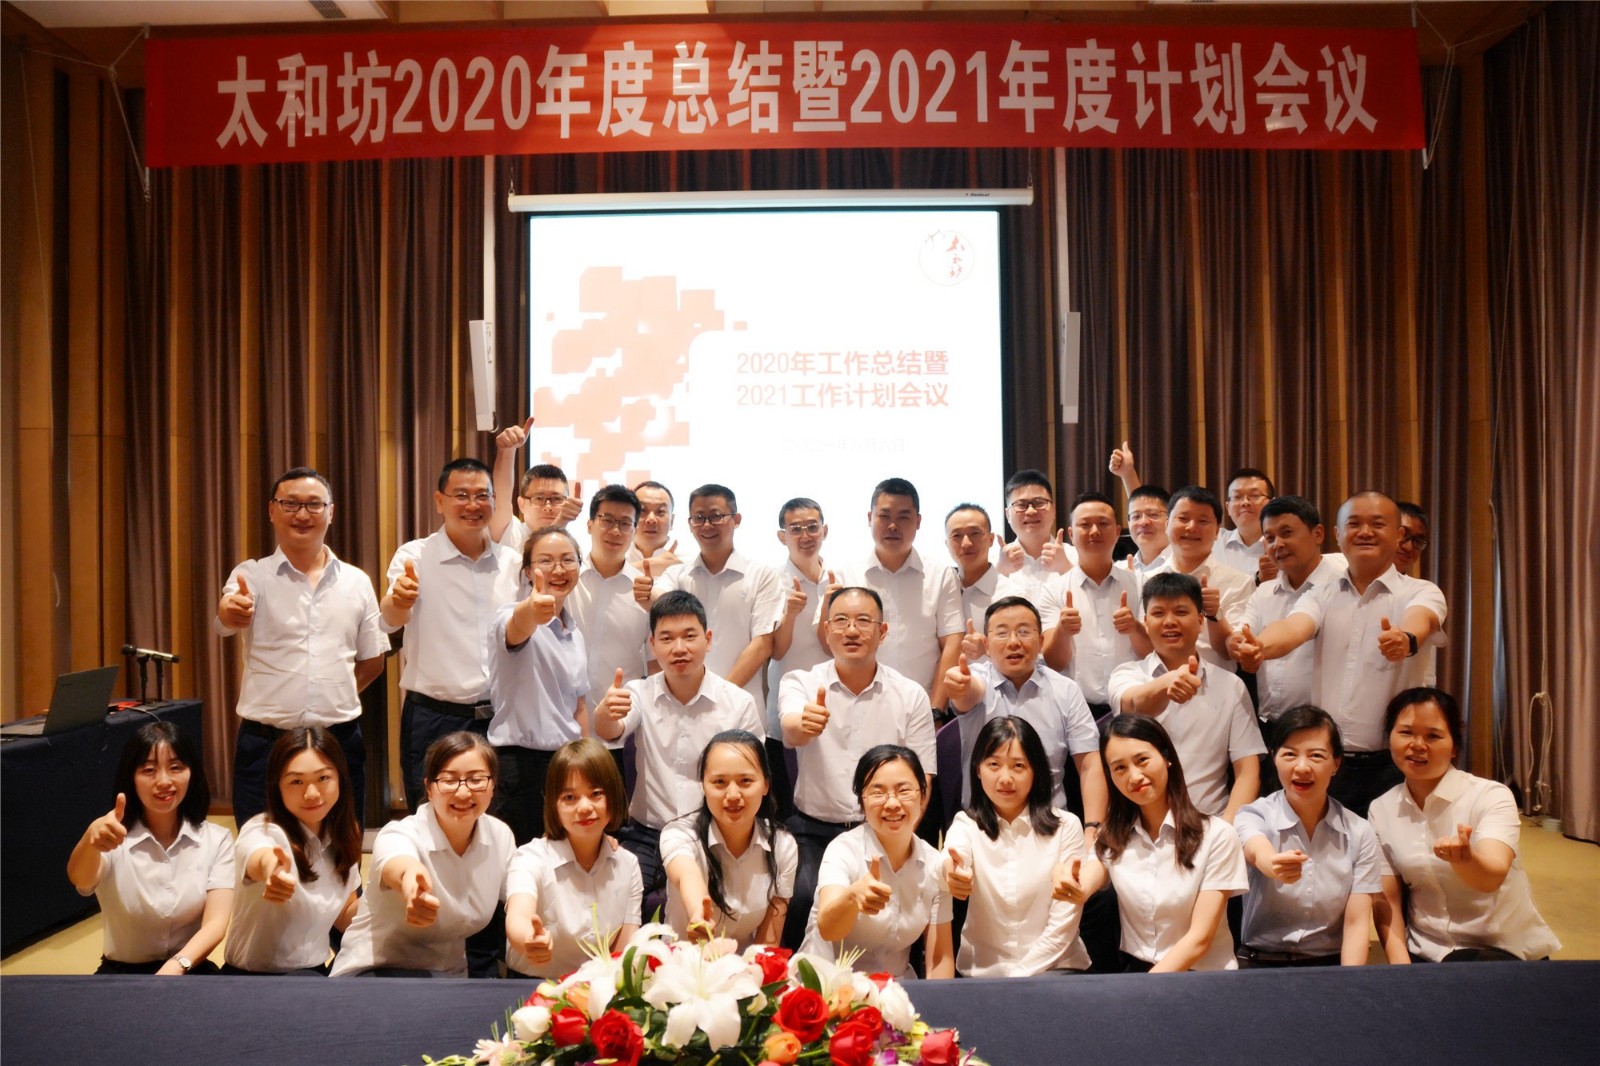  Taihefang fiscal year 2020 summary and fiscal year 2021 plan meeting were successfully held